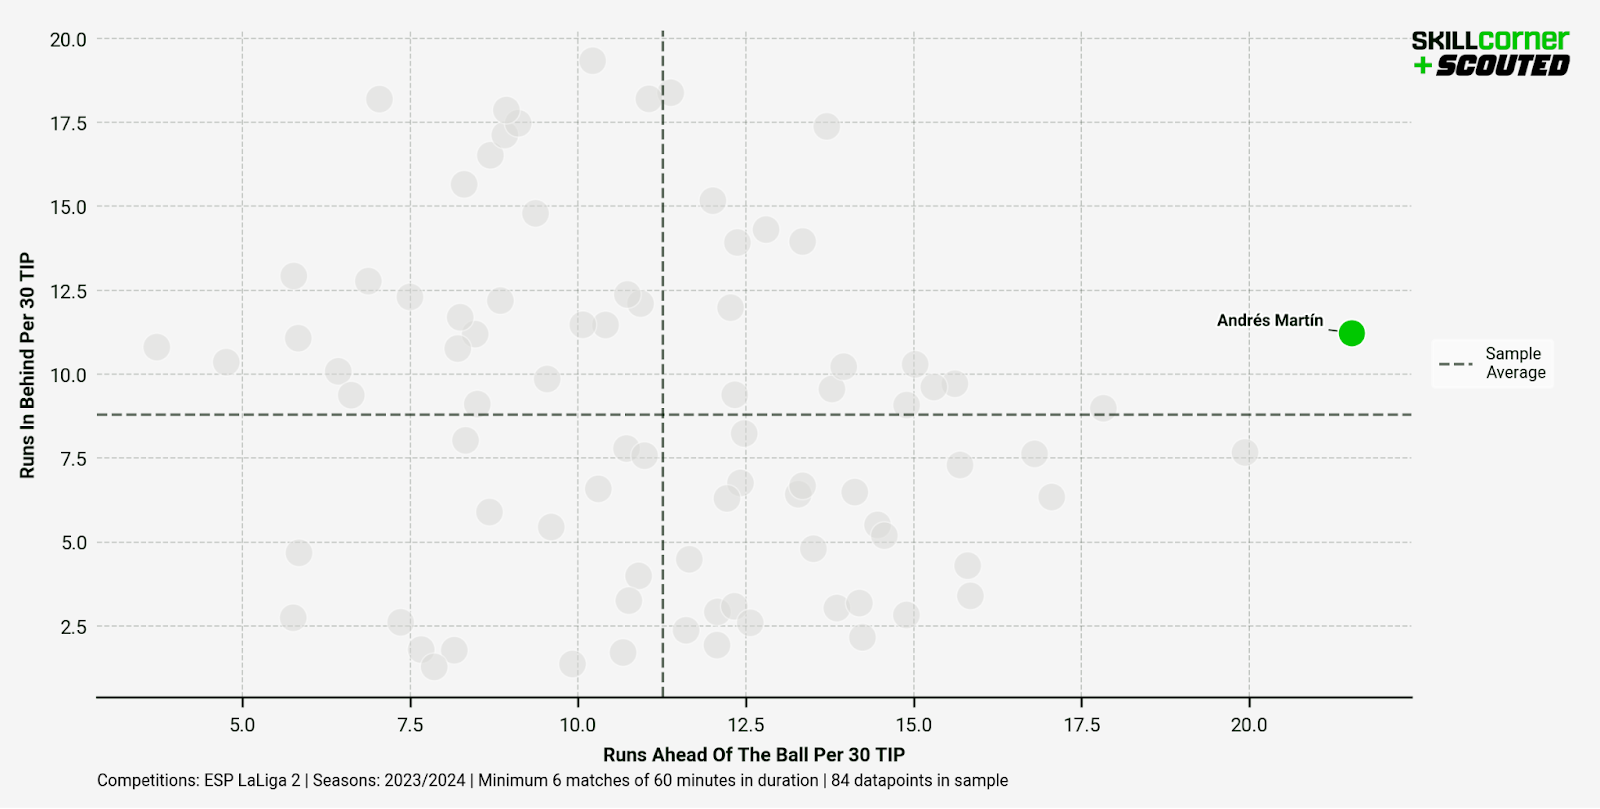 A SCOUTED x SkillCorner scatter graph plotting Runs in Behind per 30 TIP against Runs Ahead of the Ball per 30 TIP  among all Segunda División forwards in the 2023/24 season.